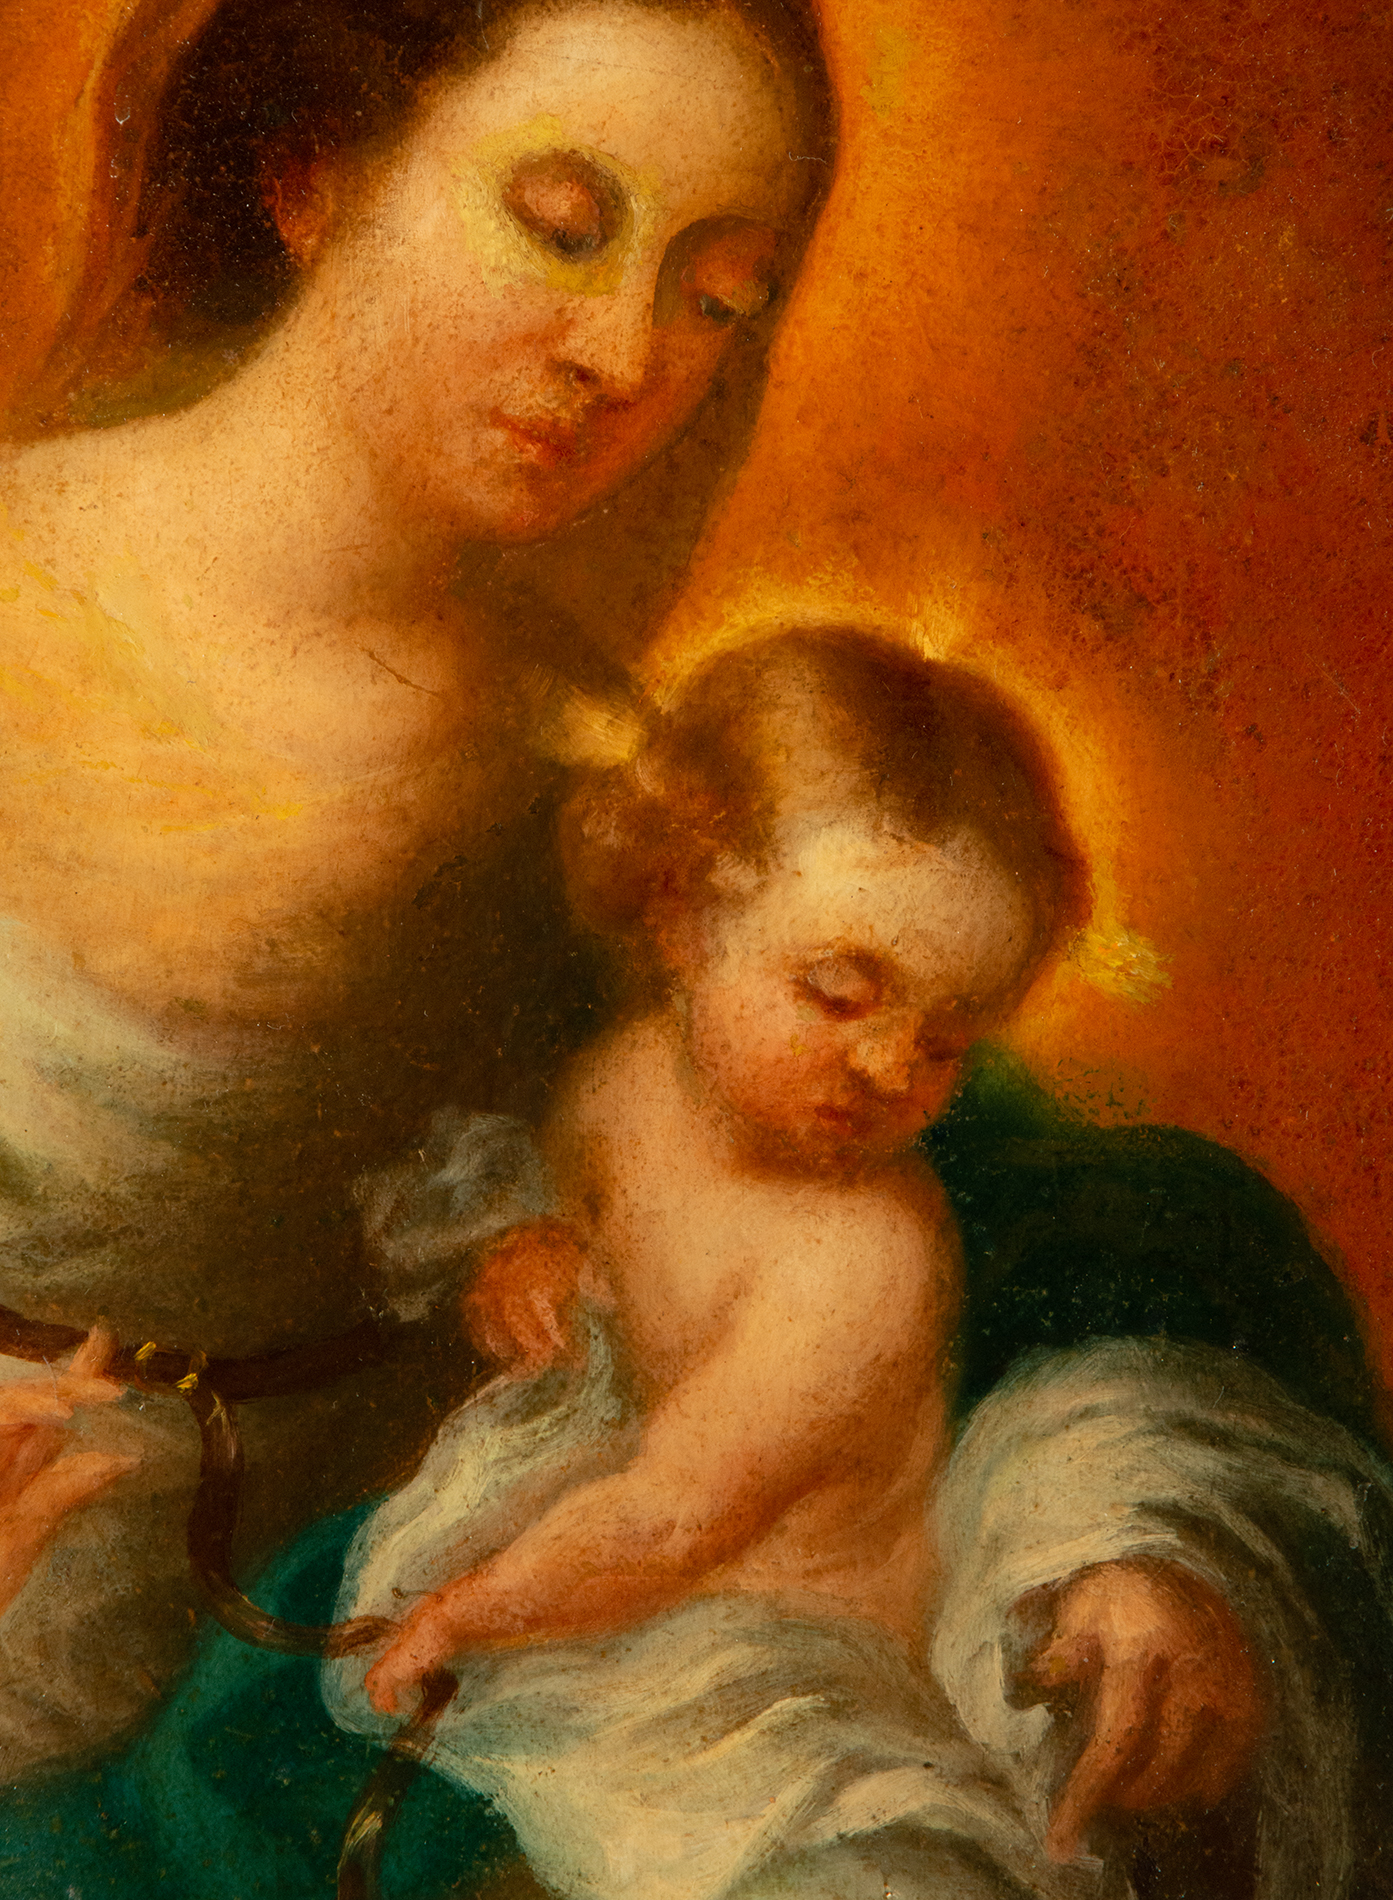 Virgin with Child in Arms, following models by Bartolomé Esteban Murillo, 19th century - Image 3 of 5